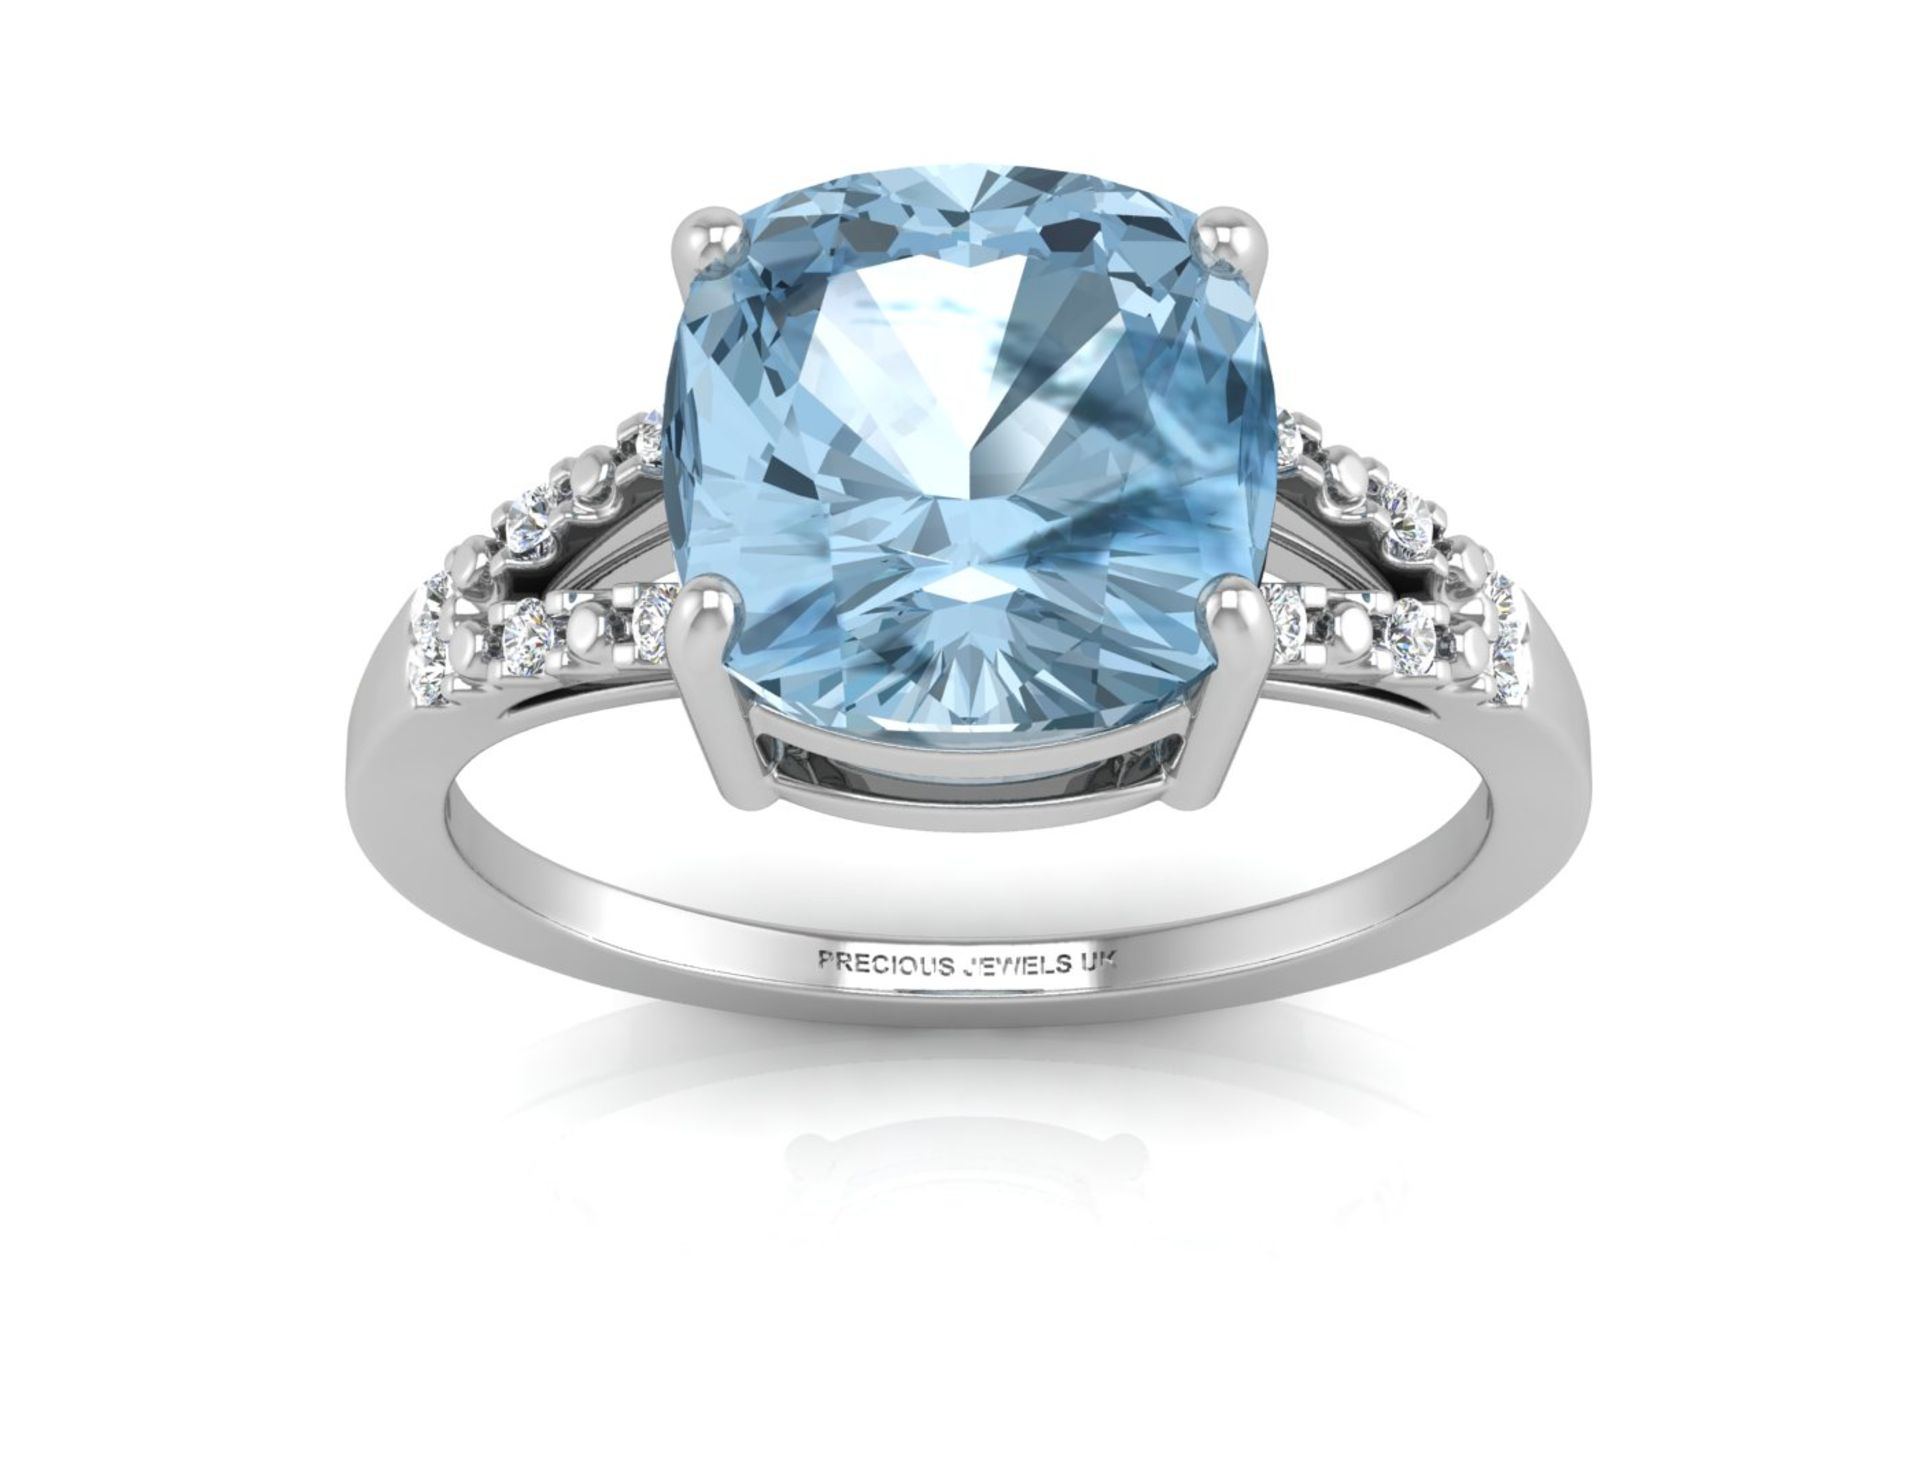 9ct White Gold Cushion Cut Blue Topaz With Diamond Set Shoulders Ring 0.06 Carats - Image 3 of 5